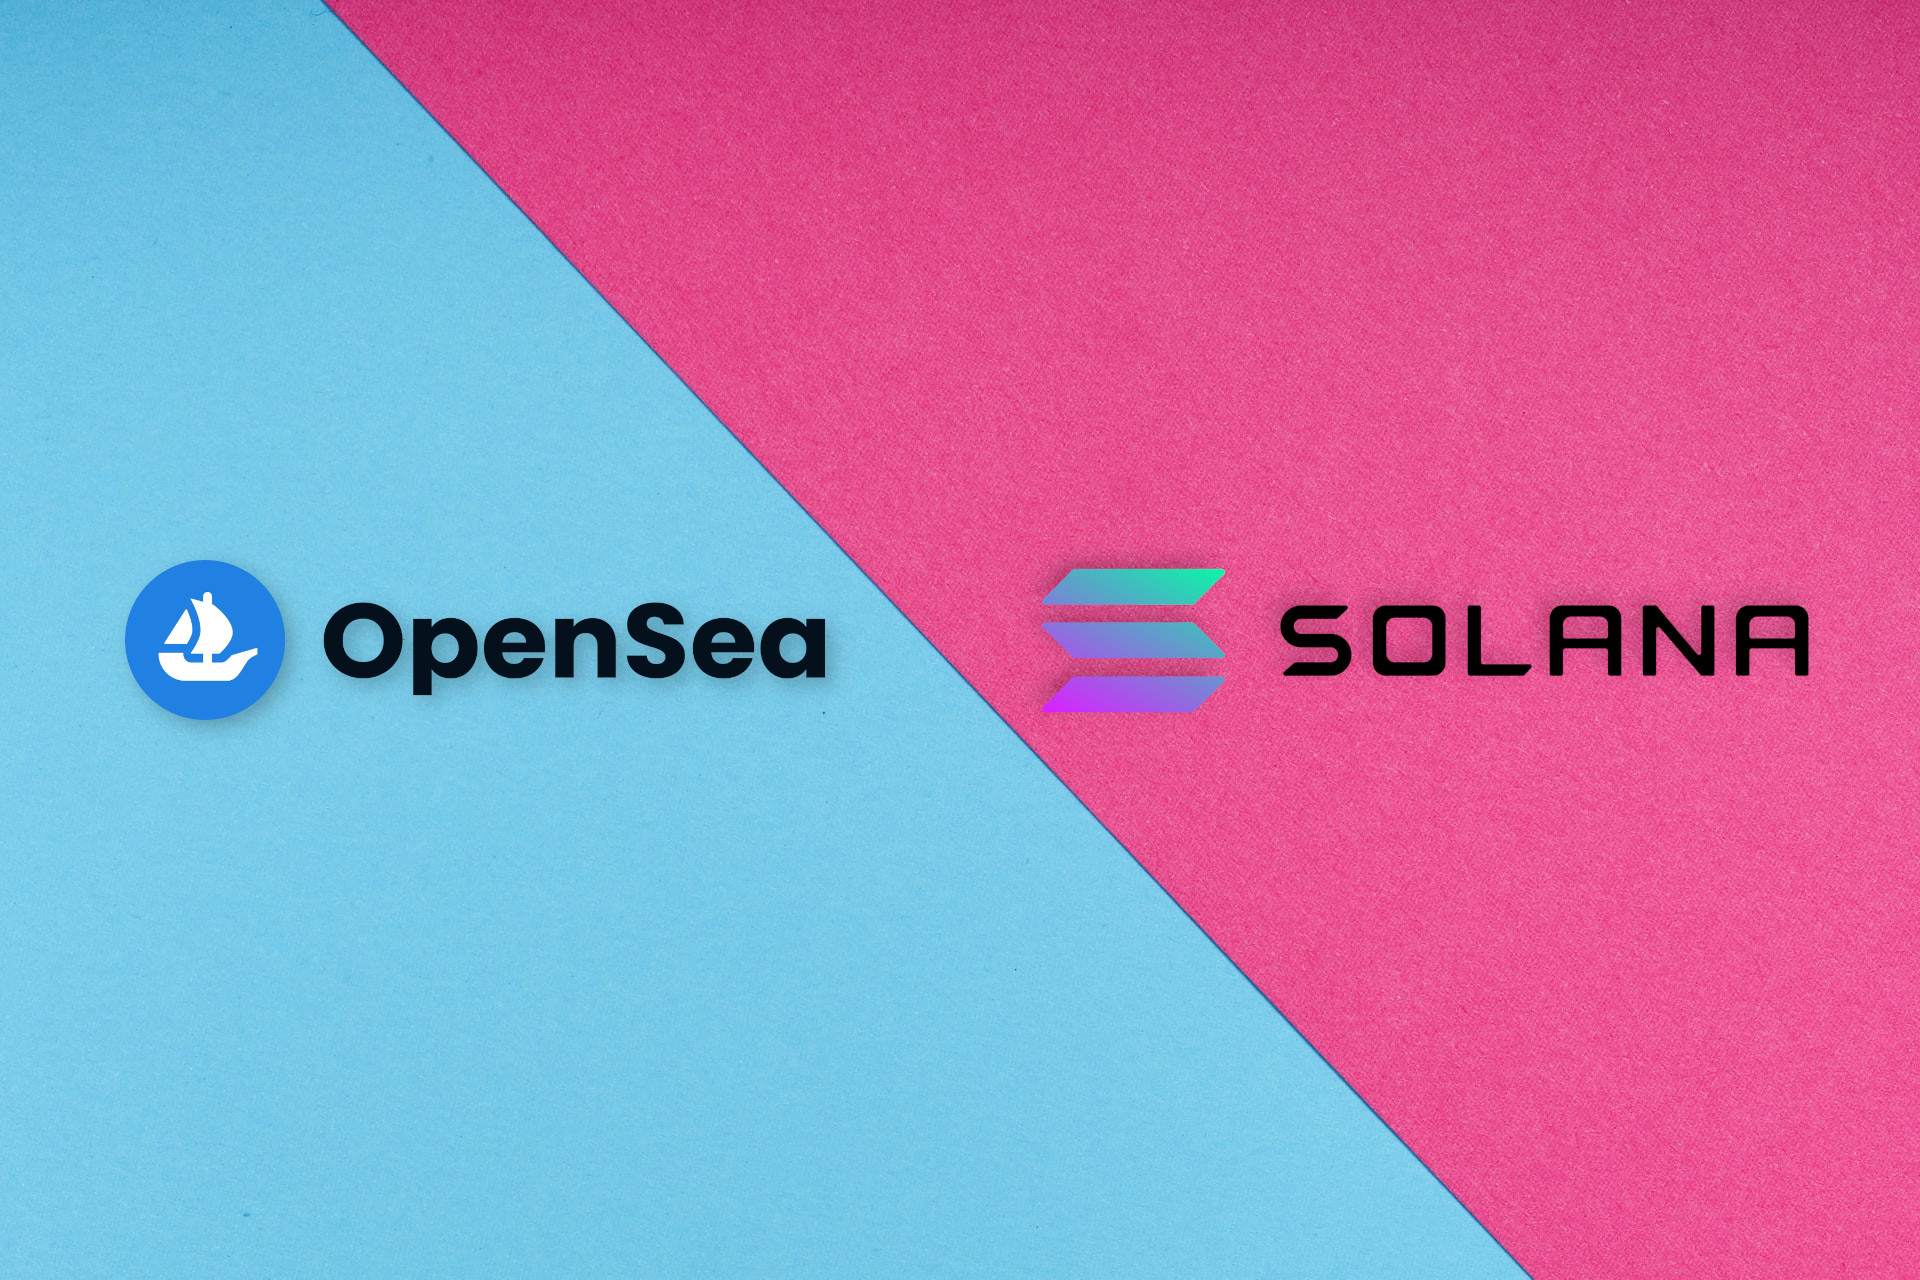 OpenSea and Solana image cover